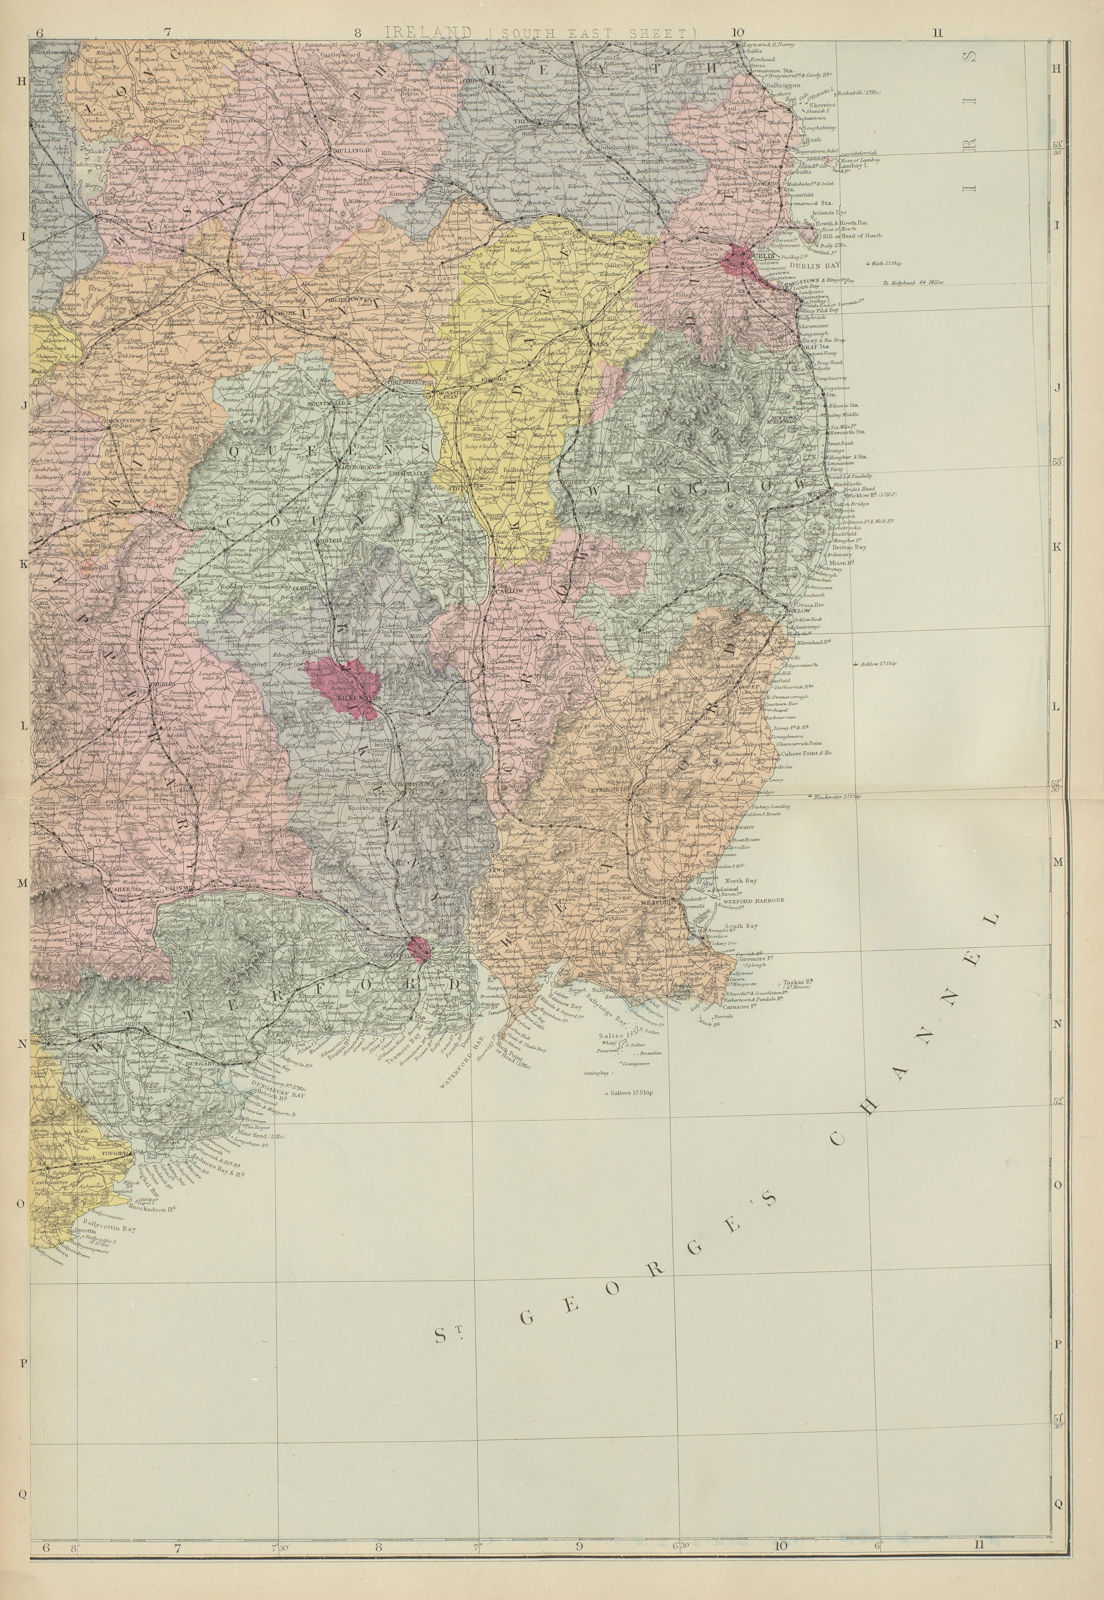 Associate Product IRELAND (South East) Leinster Dublin Wicklow Wexford GW BACON 1885 old map